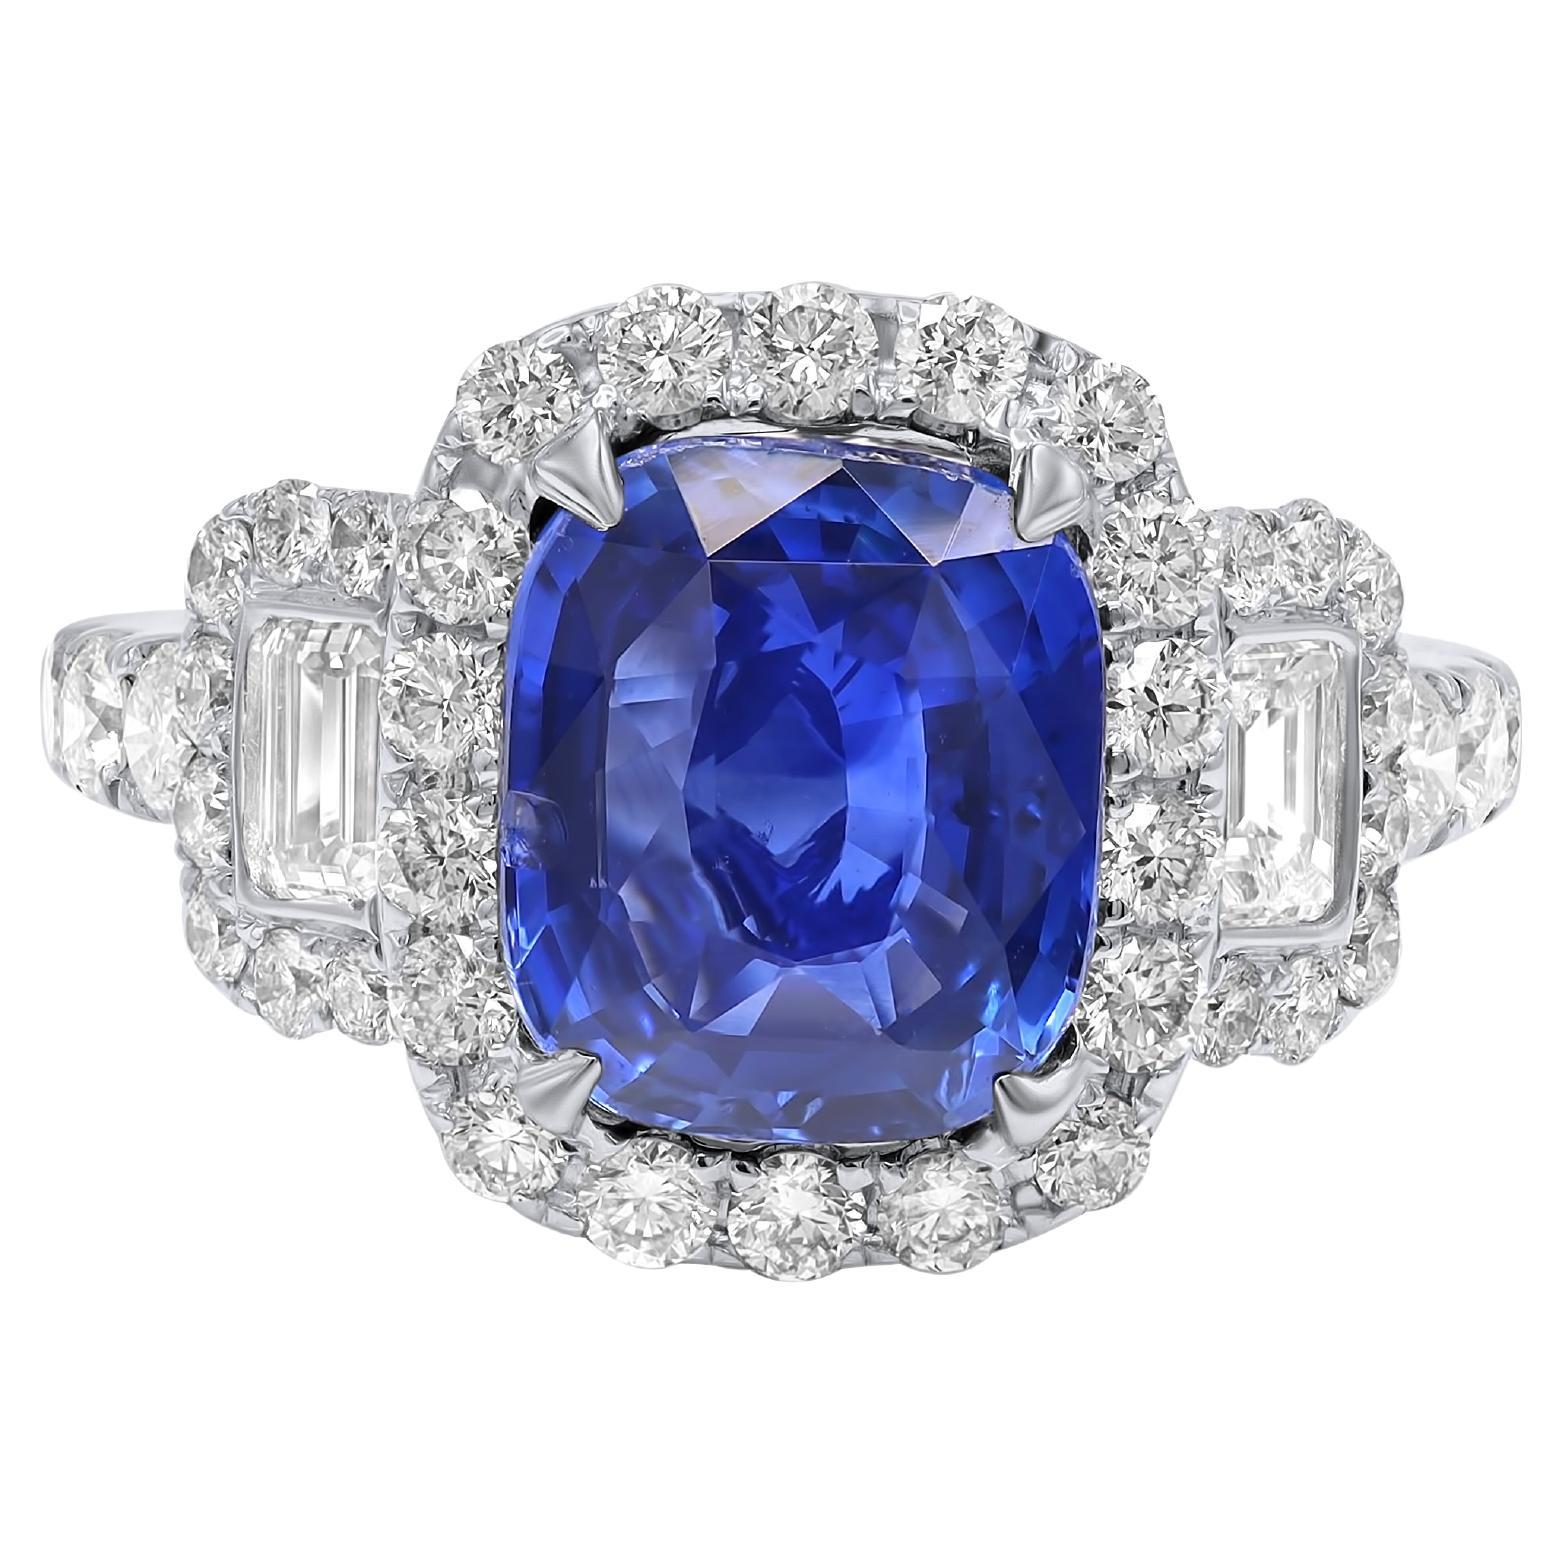 Diana M. 18 kt white gold sapphire diamond ring featuring a 3.58 ct 